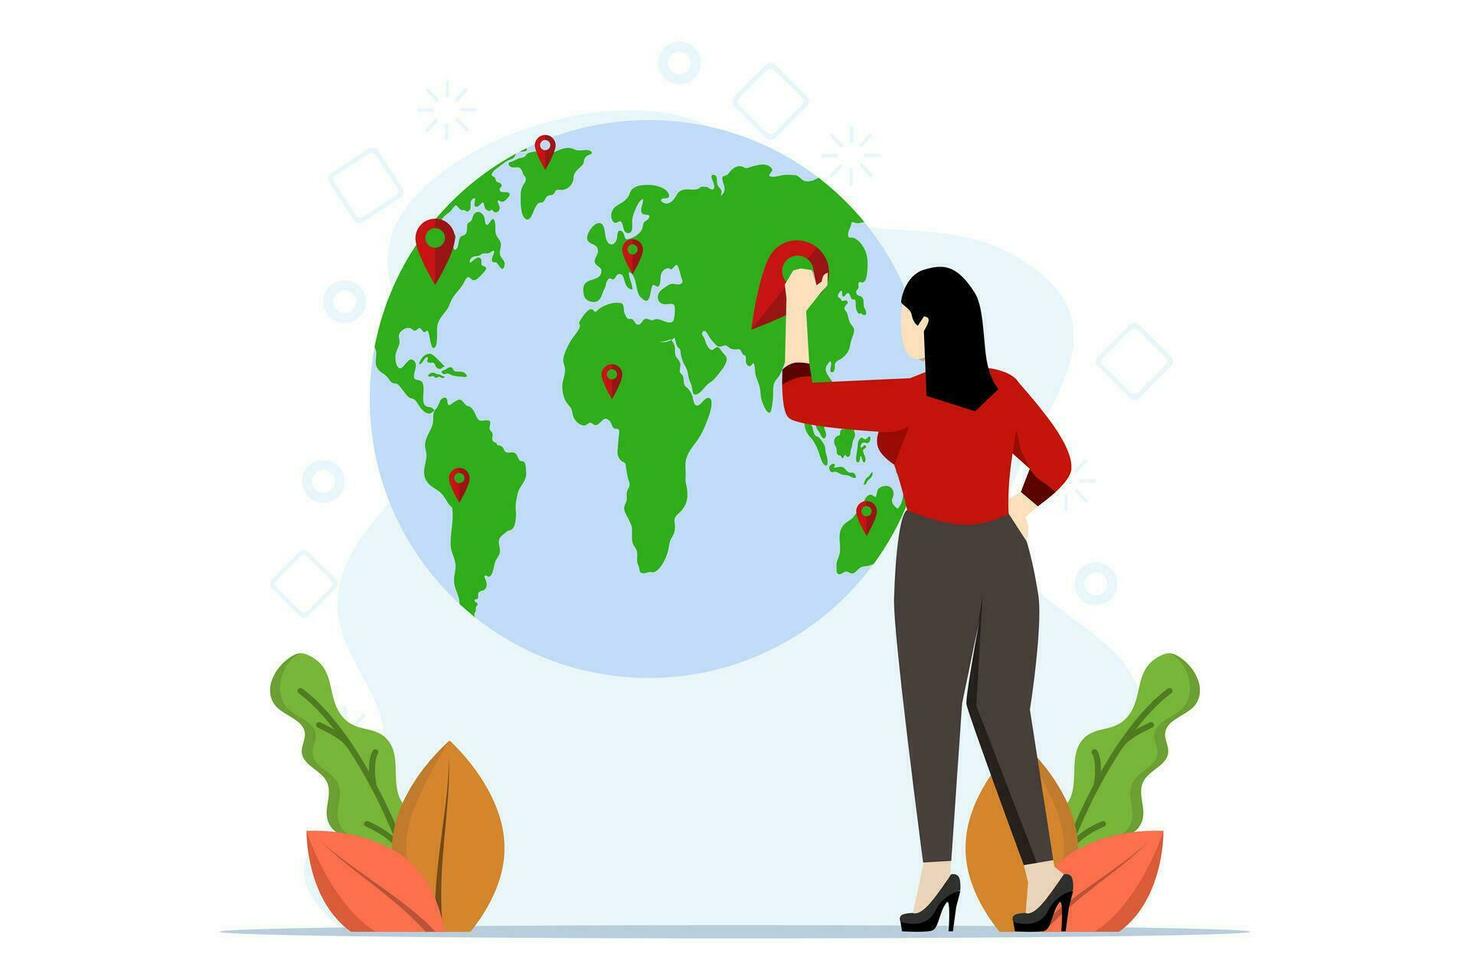 opening a company branch, expanding business worldwide, businesswoman putting new branch on the world map, Global business expansion, franchising in new locations covering all continents. vector